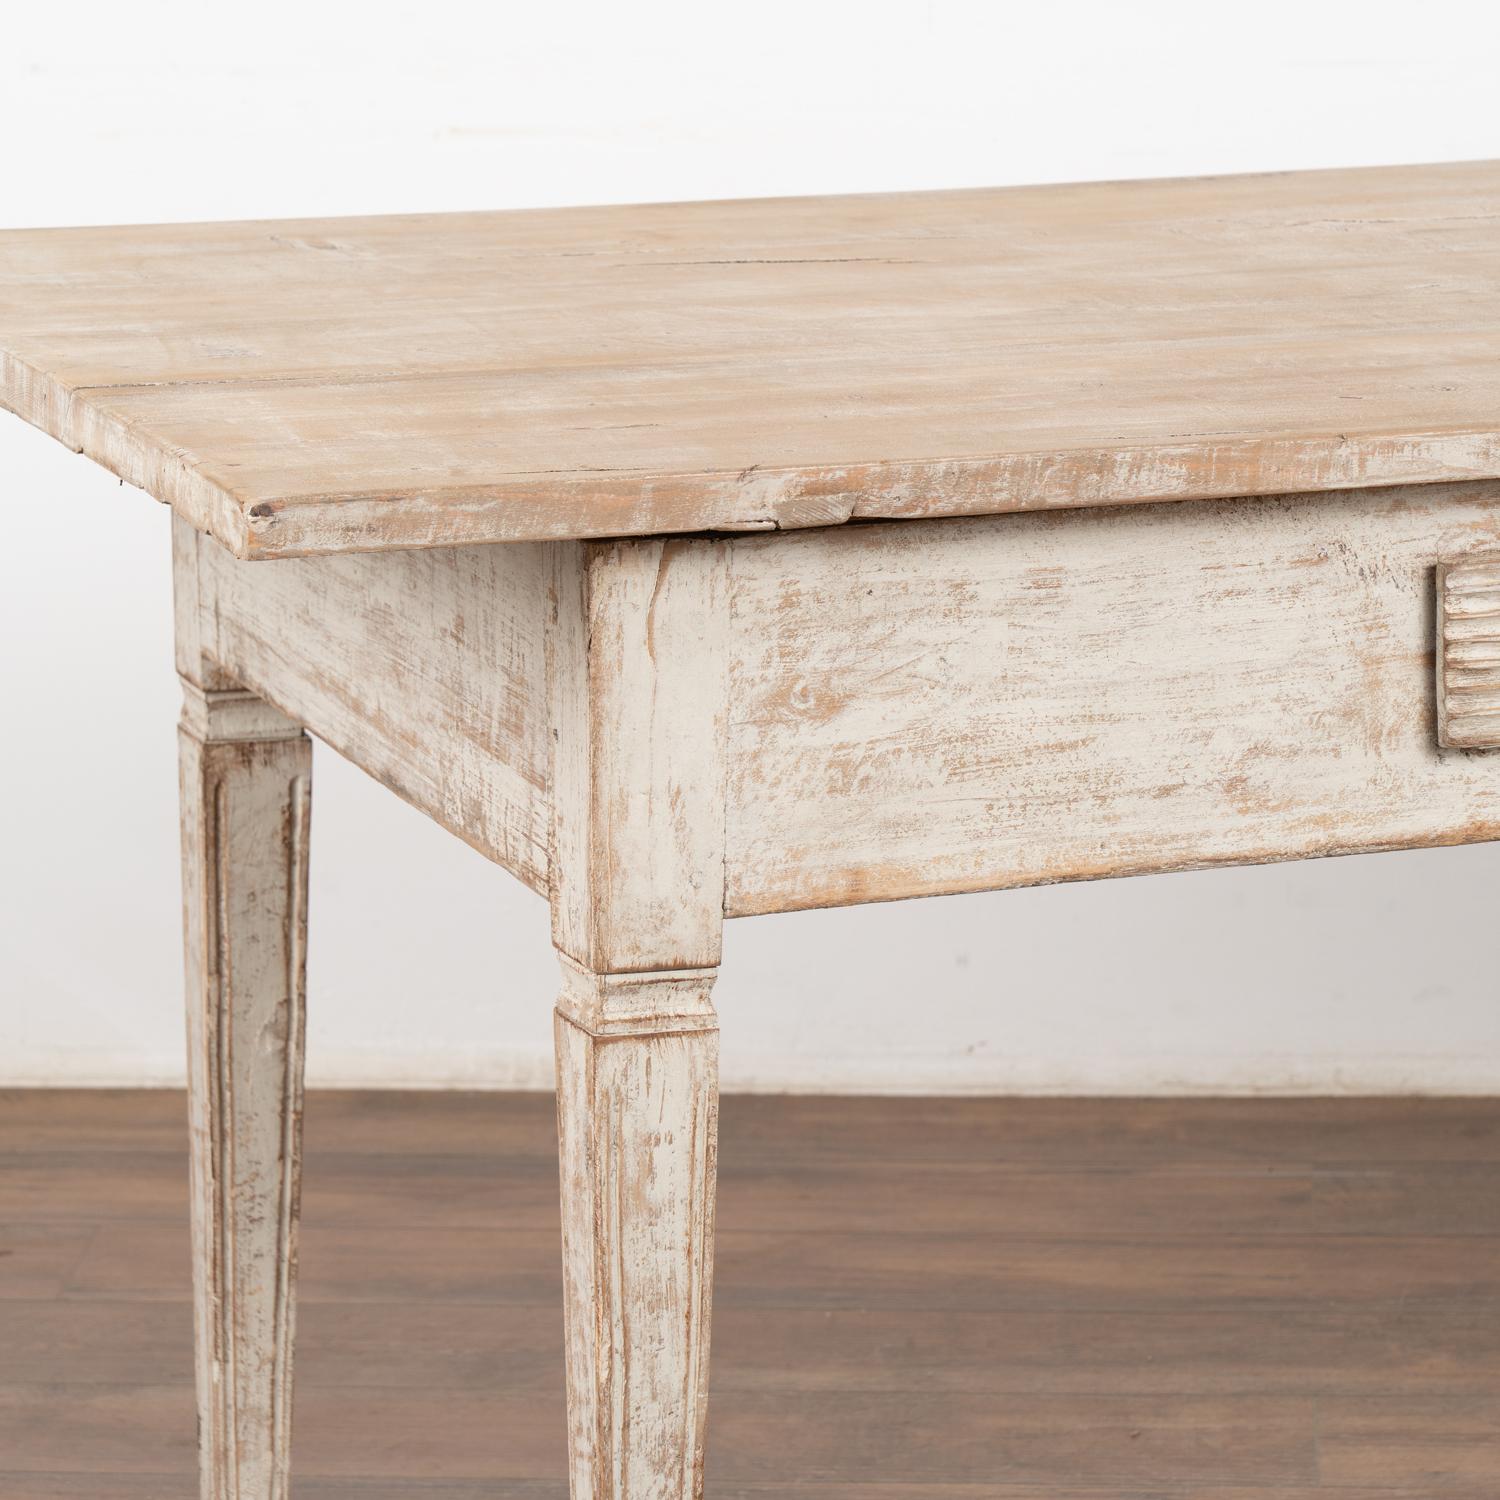 Wood White Painted Gustavian Style Table Writing Desk With One Drawer, circa 1860-80 For Sale